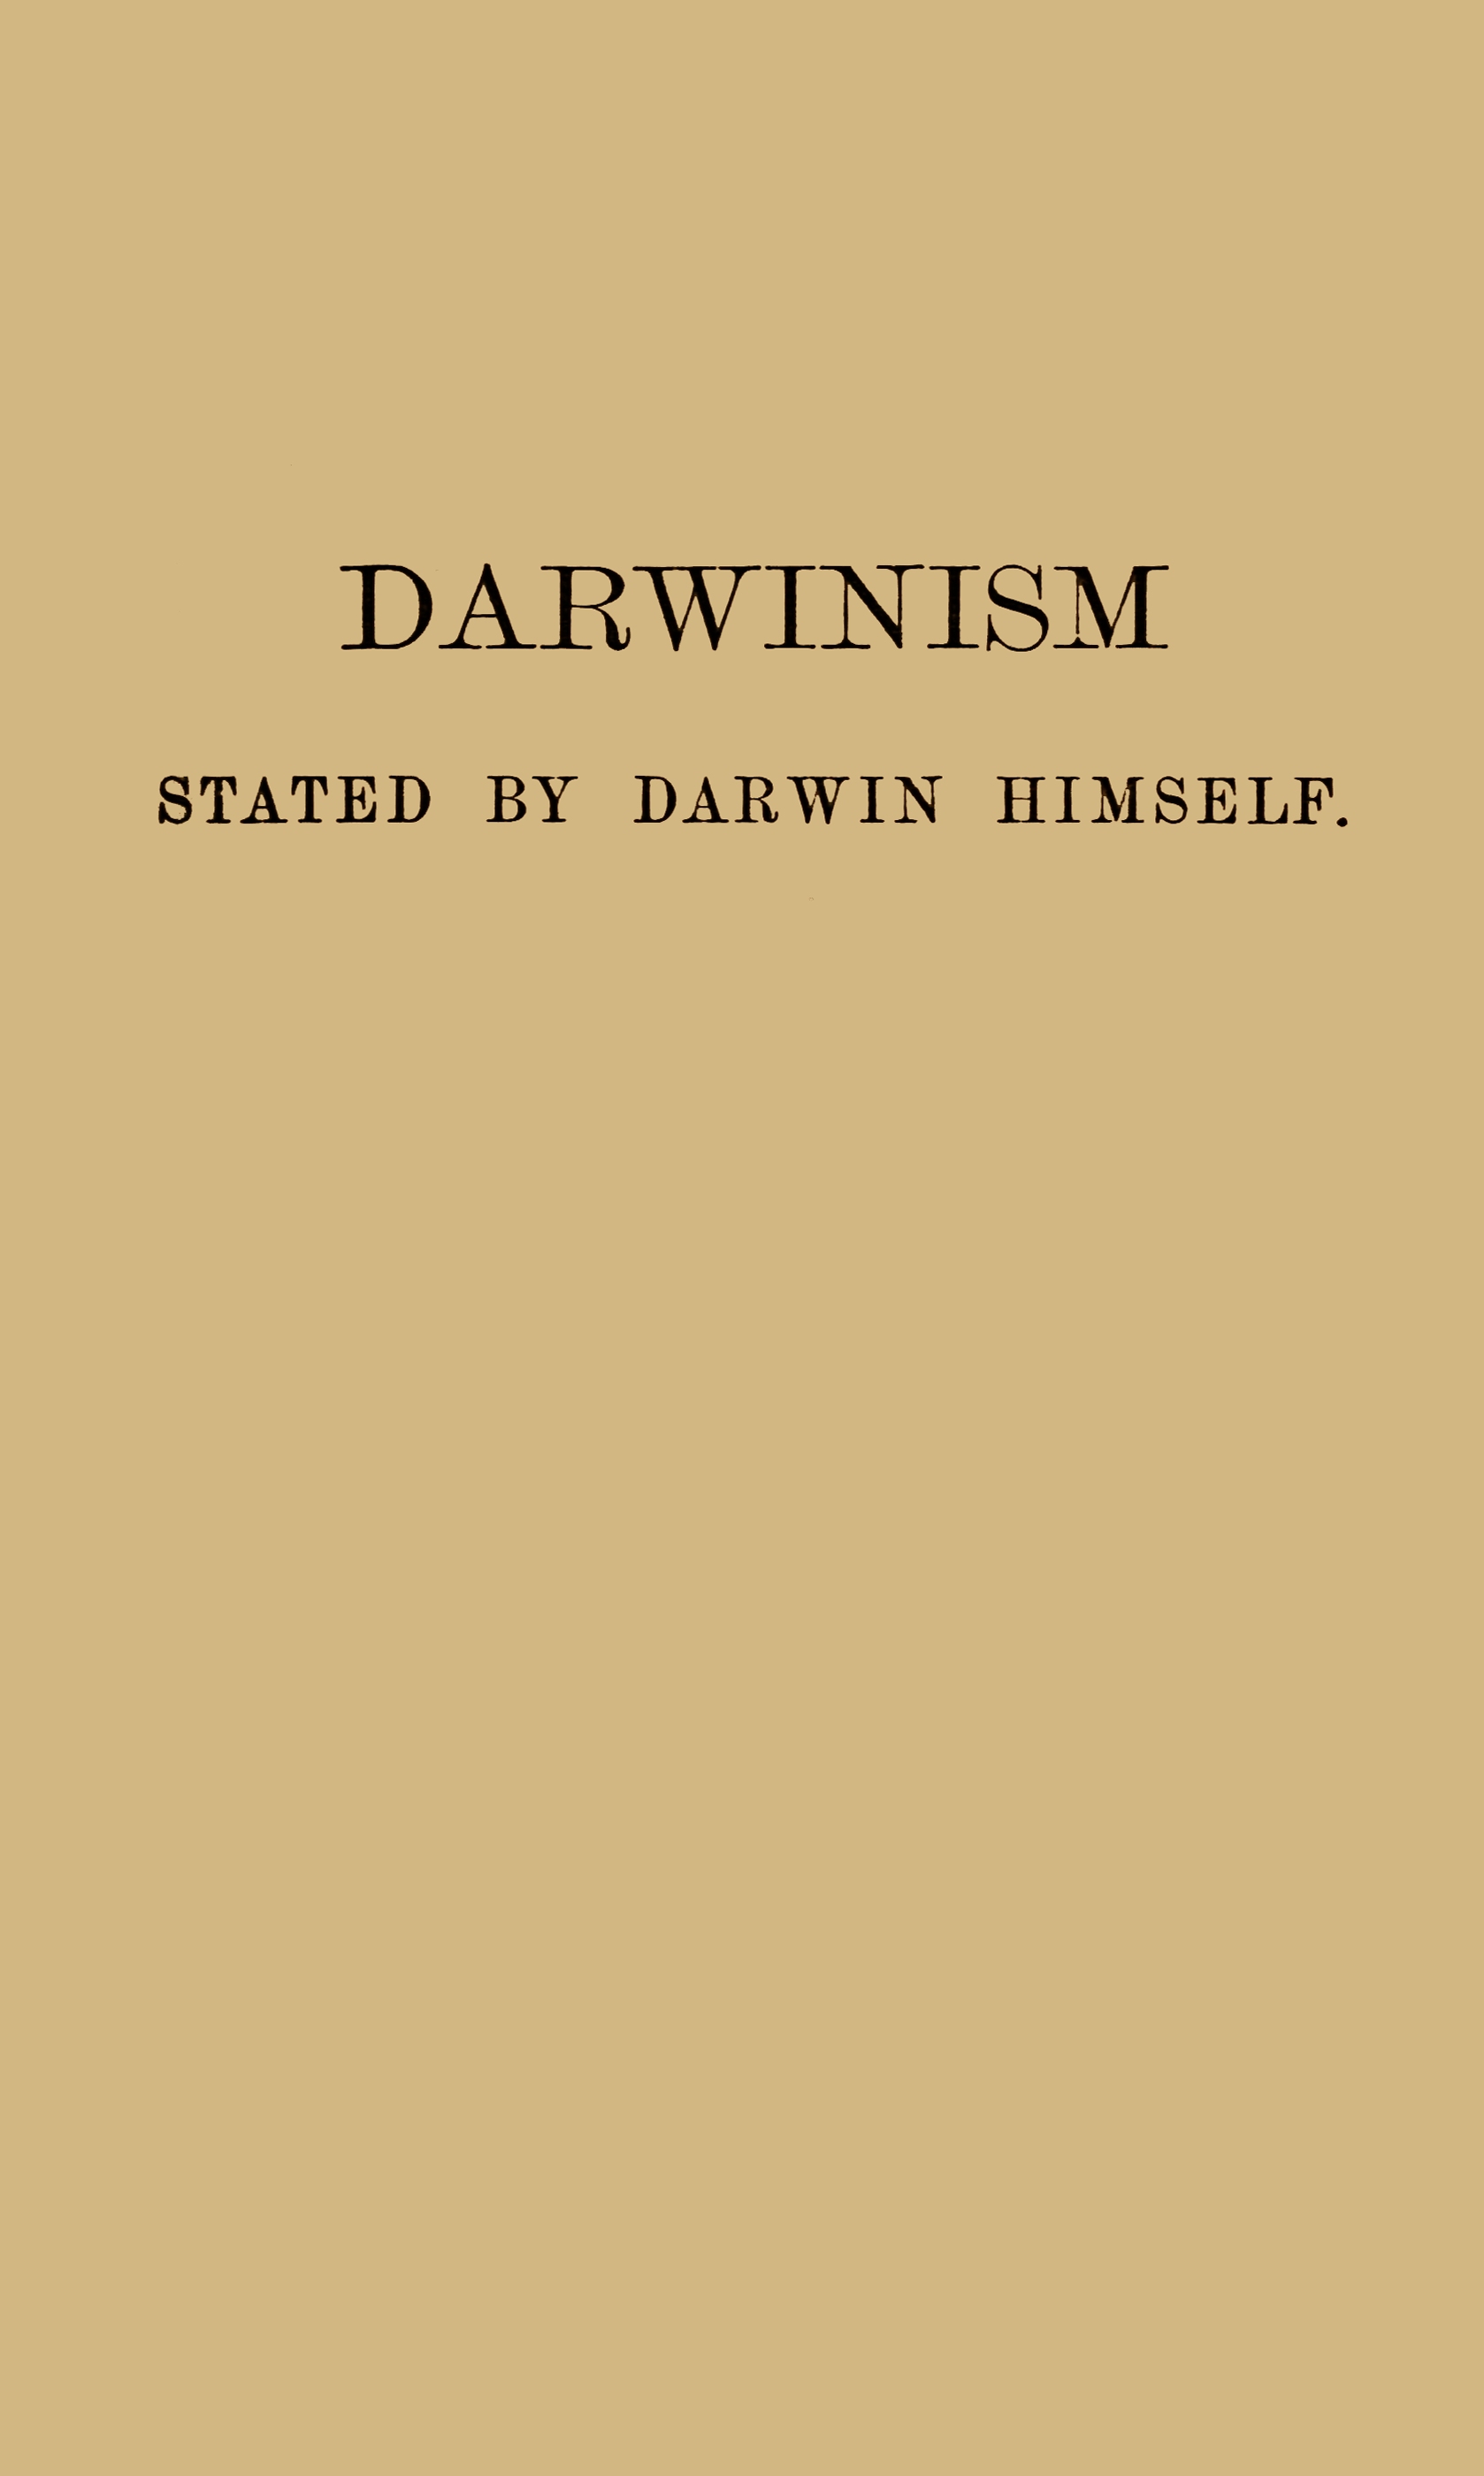 Darwinism stated by Darwin himself&#10;Characteristic passages from the writings of Charles Darwin